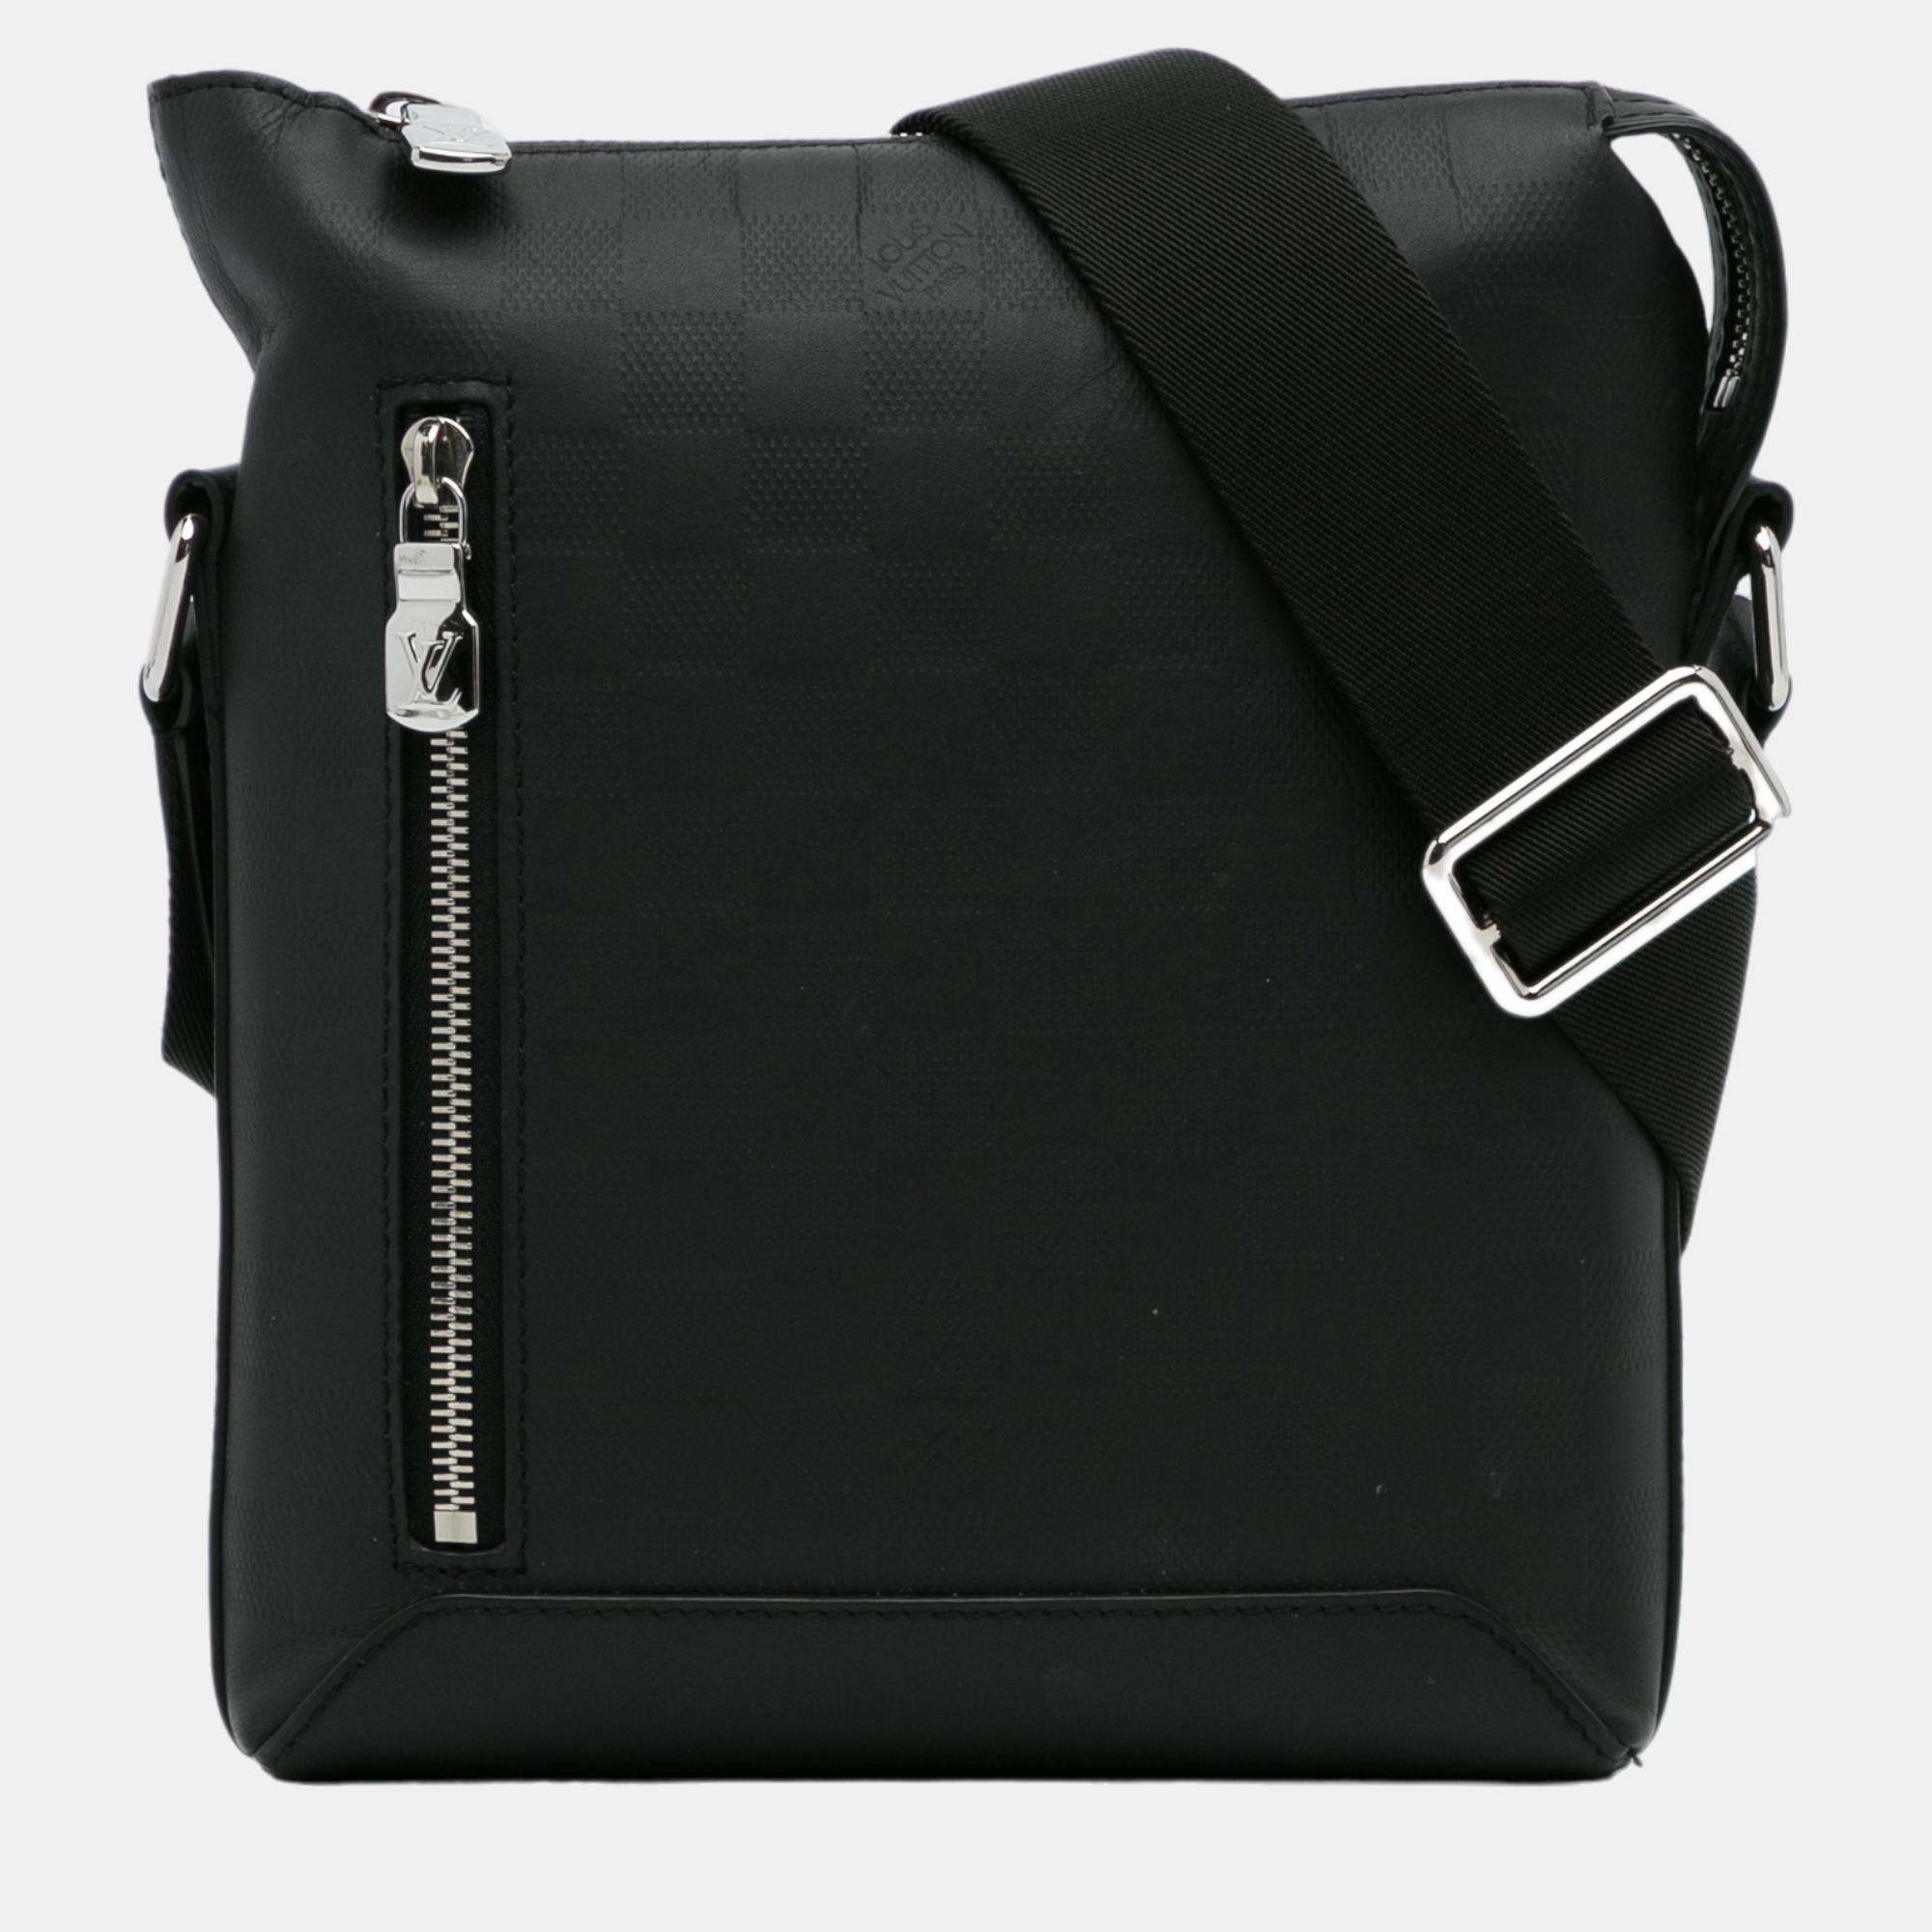 The Discovery Messenger BB features a leather body an adjustable flat shoulder strap an exterior zip pocket a top zip closure and an interior slip pocket.